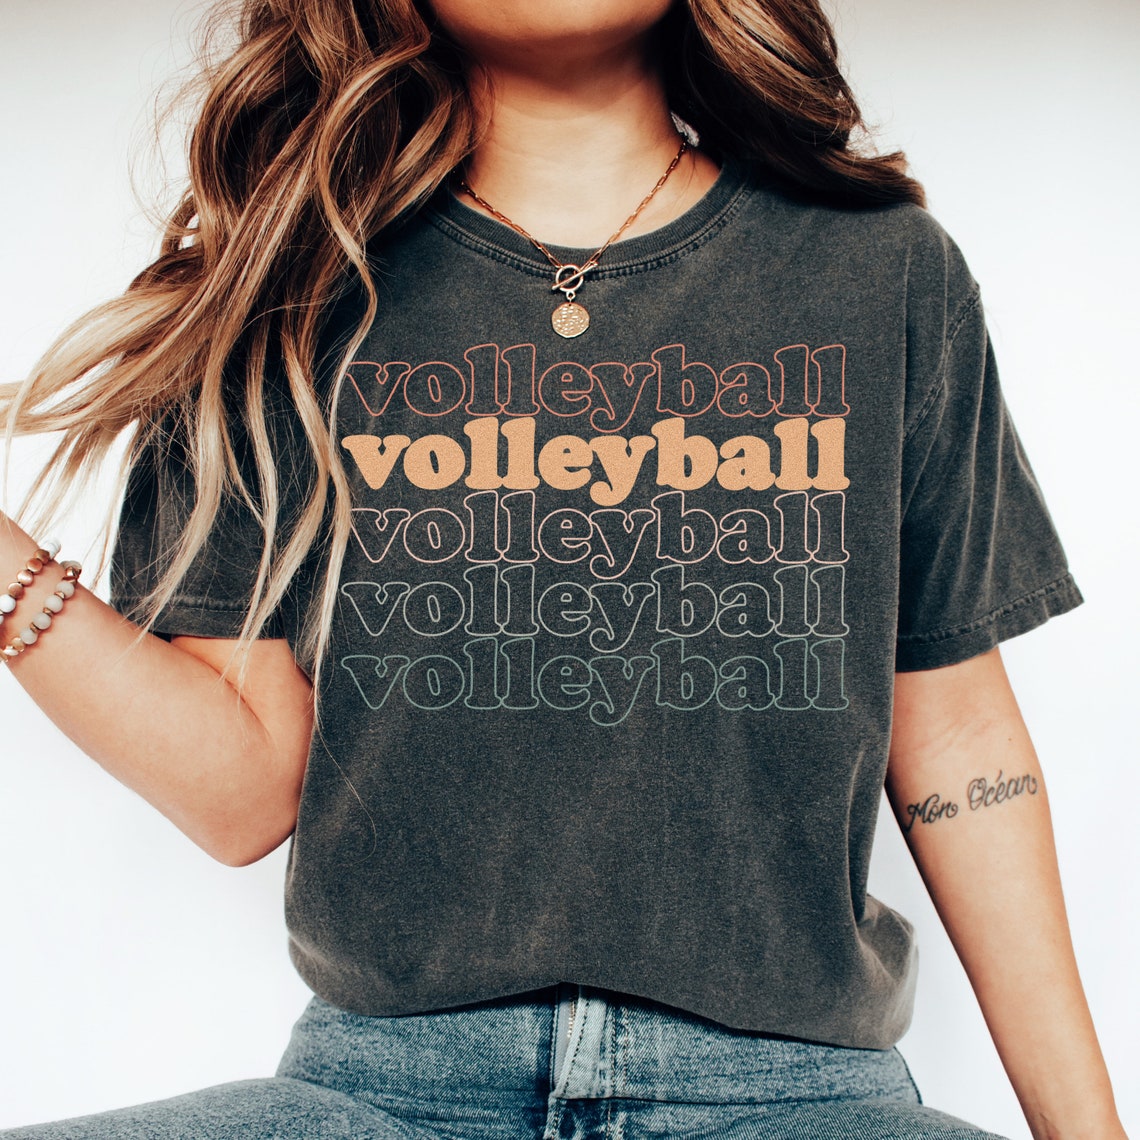 Volleyball shirt cute athlete gift